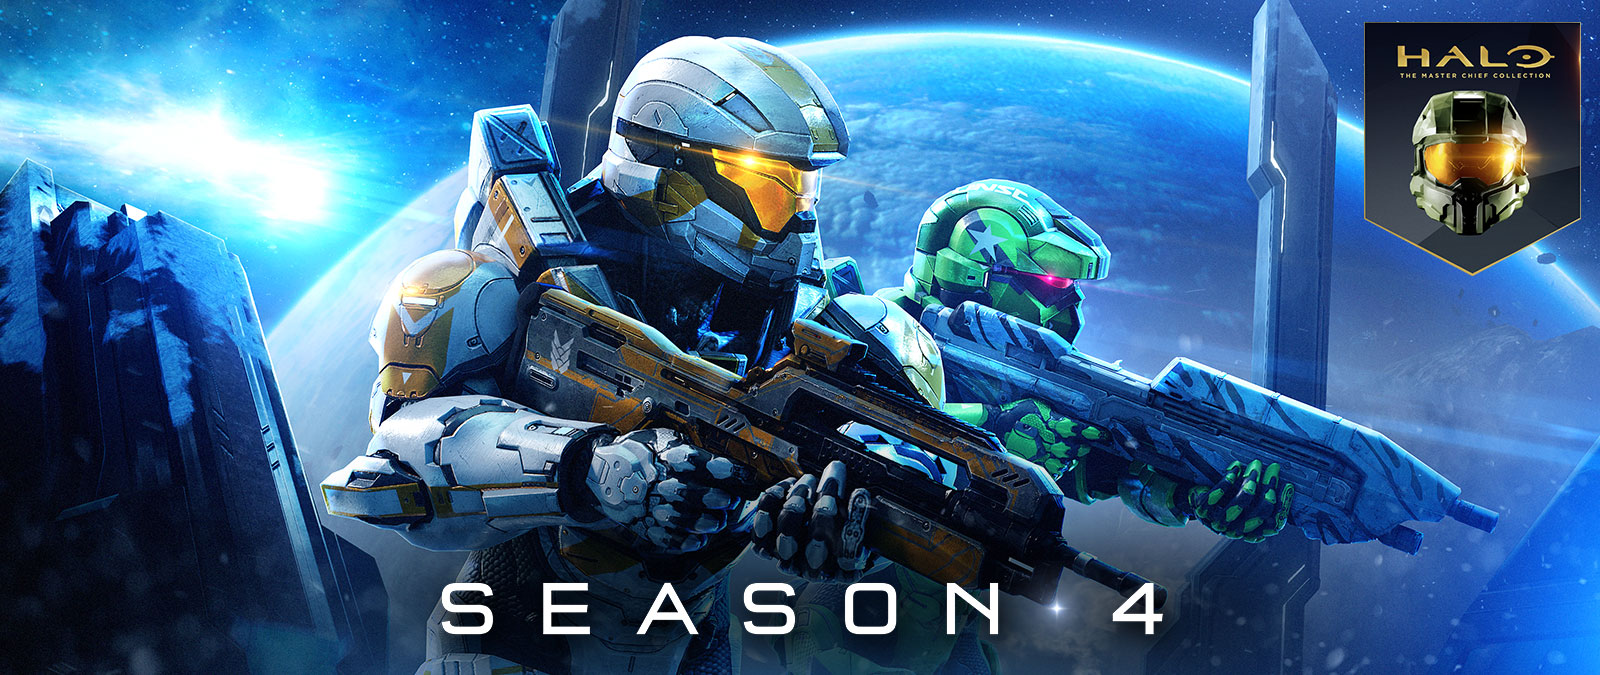 Halo: The Master Chief Collection, Season 4, Two Spartans stand side by side ready to battle with a large planet in the background